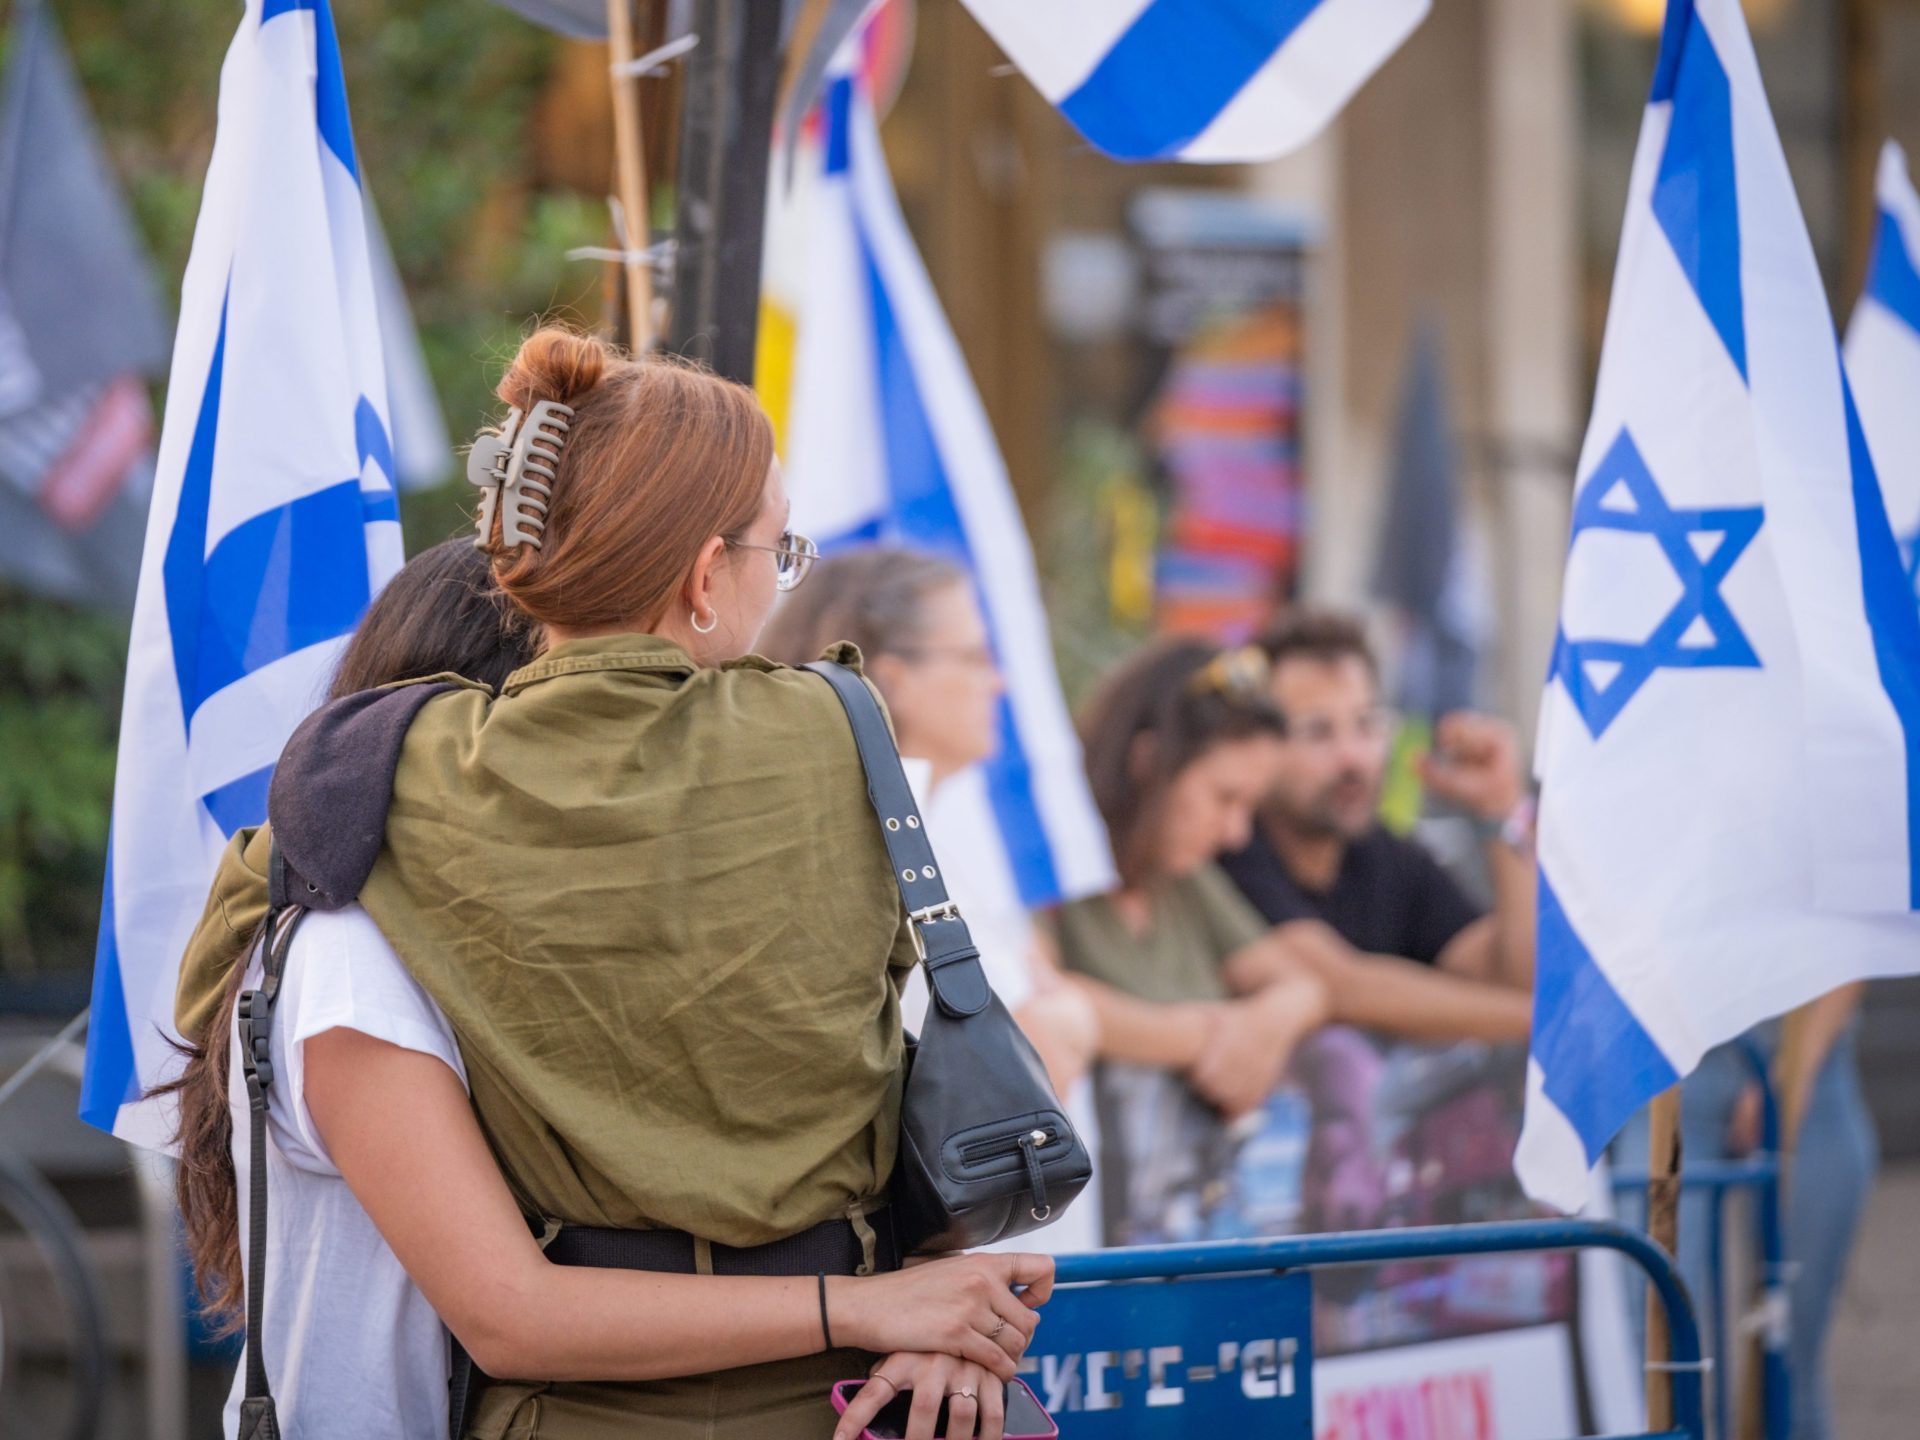 ‘If not for Hamas we could live with Palestinians’: Conversations in Israel | Israel-Palestine conflict News #Hamas #live #Palestinians #Conversations #Israel #IsraelPalestine #conflict #News